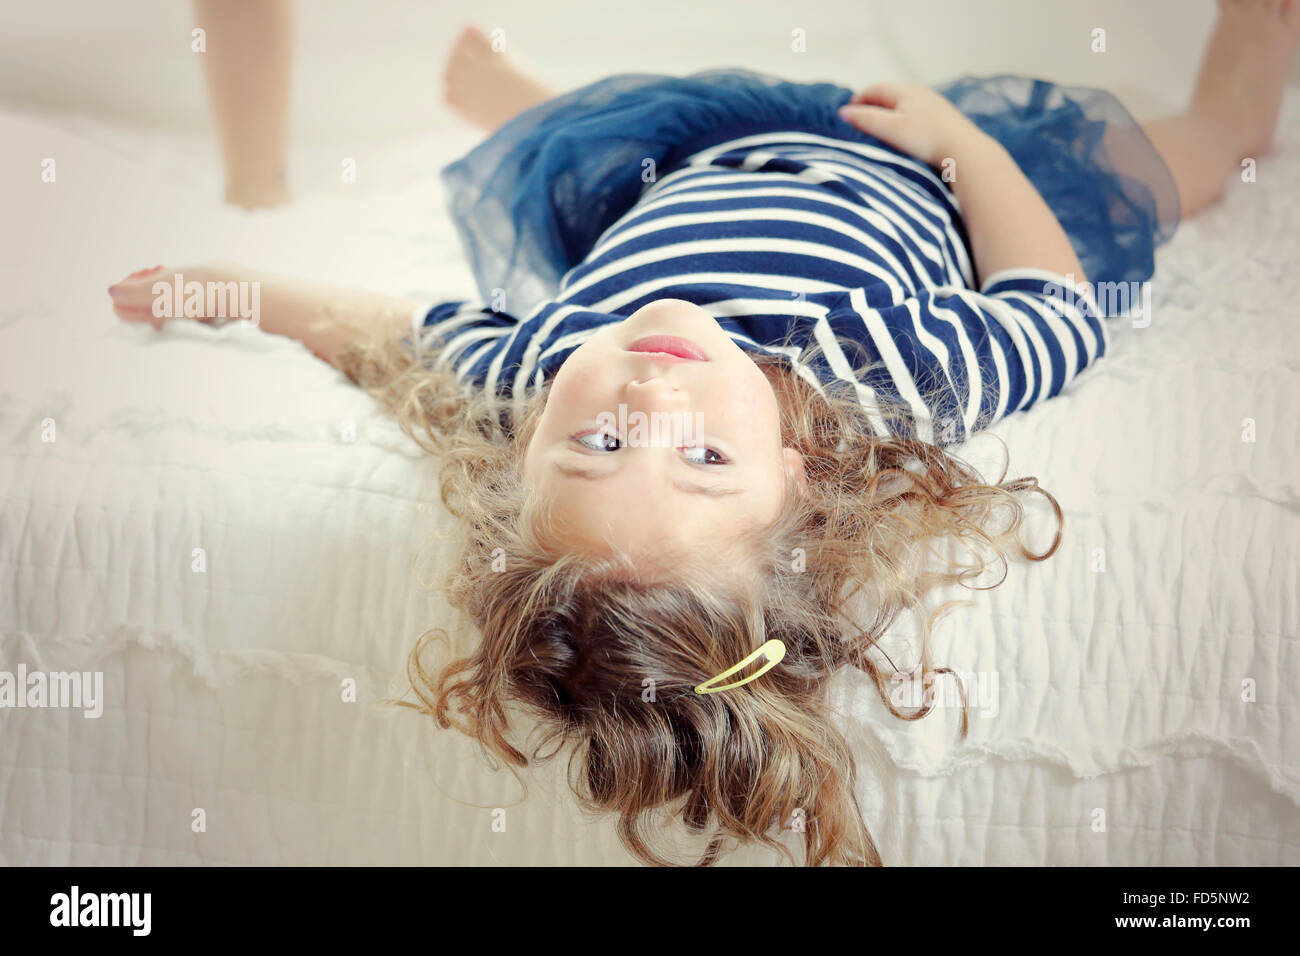 Image of a little girl laying on her bed with her head hanging off the edge so that she's upside down. Stock Photo